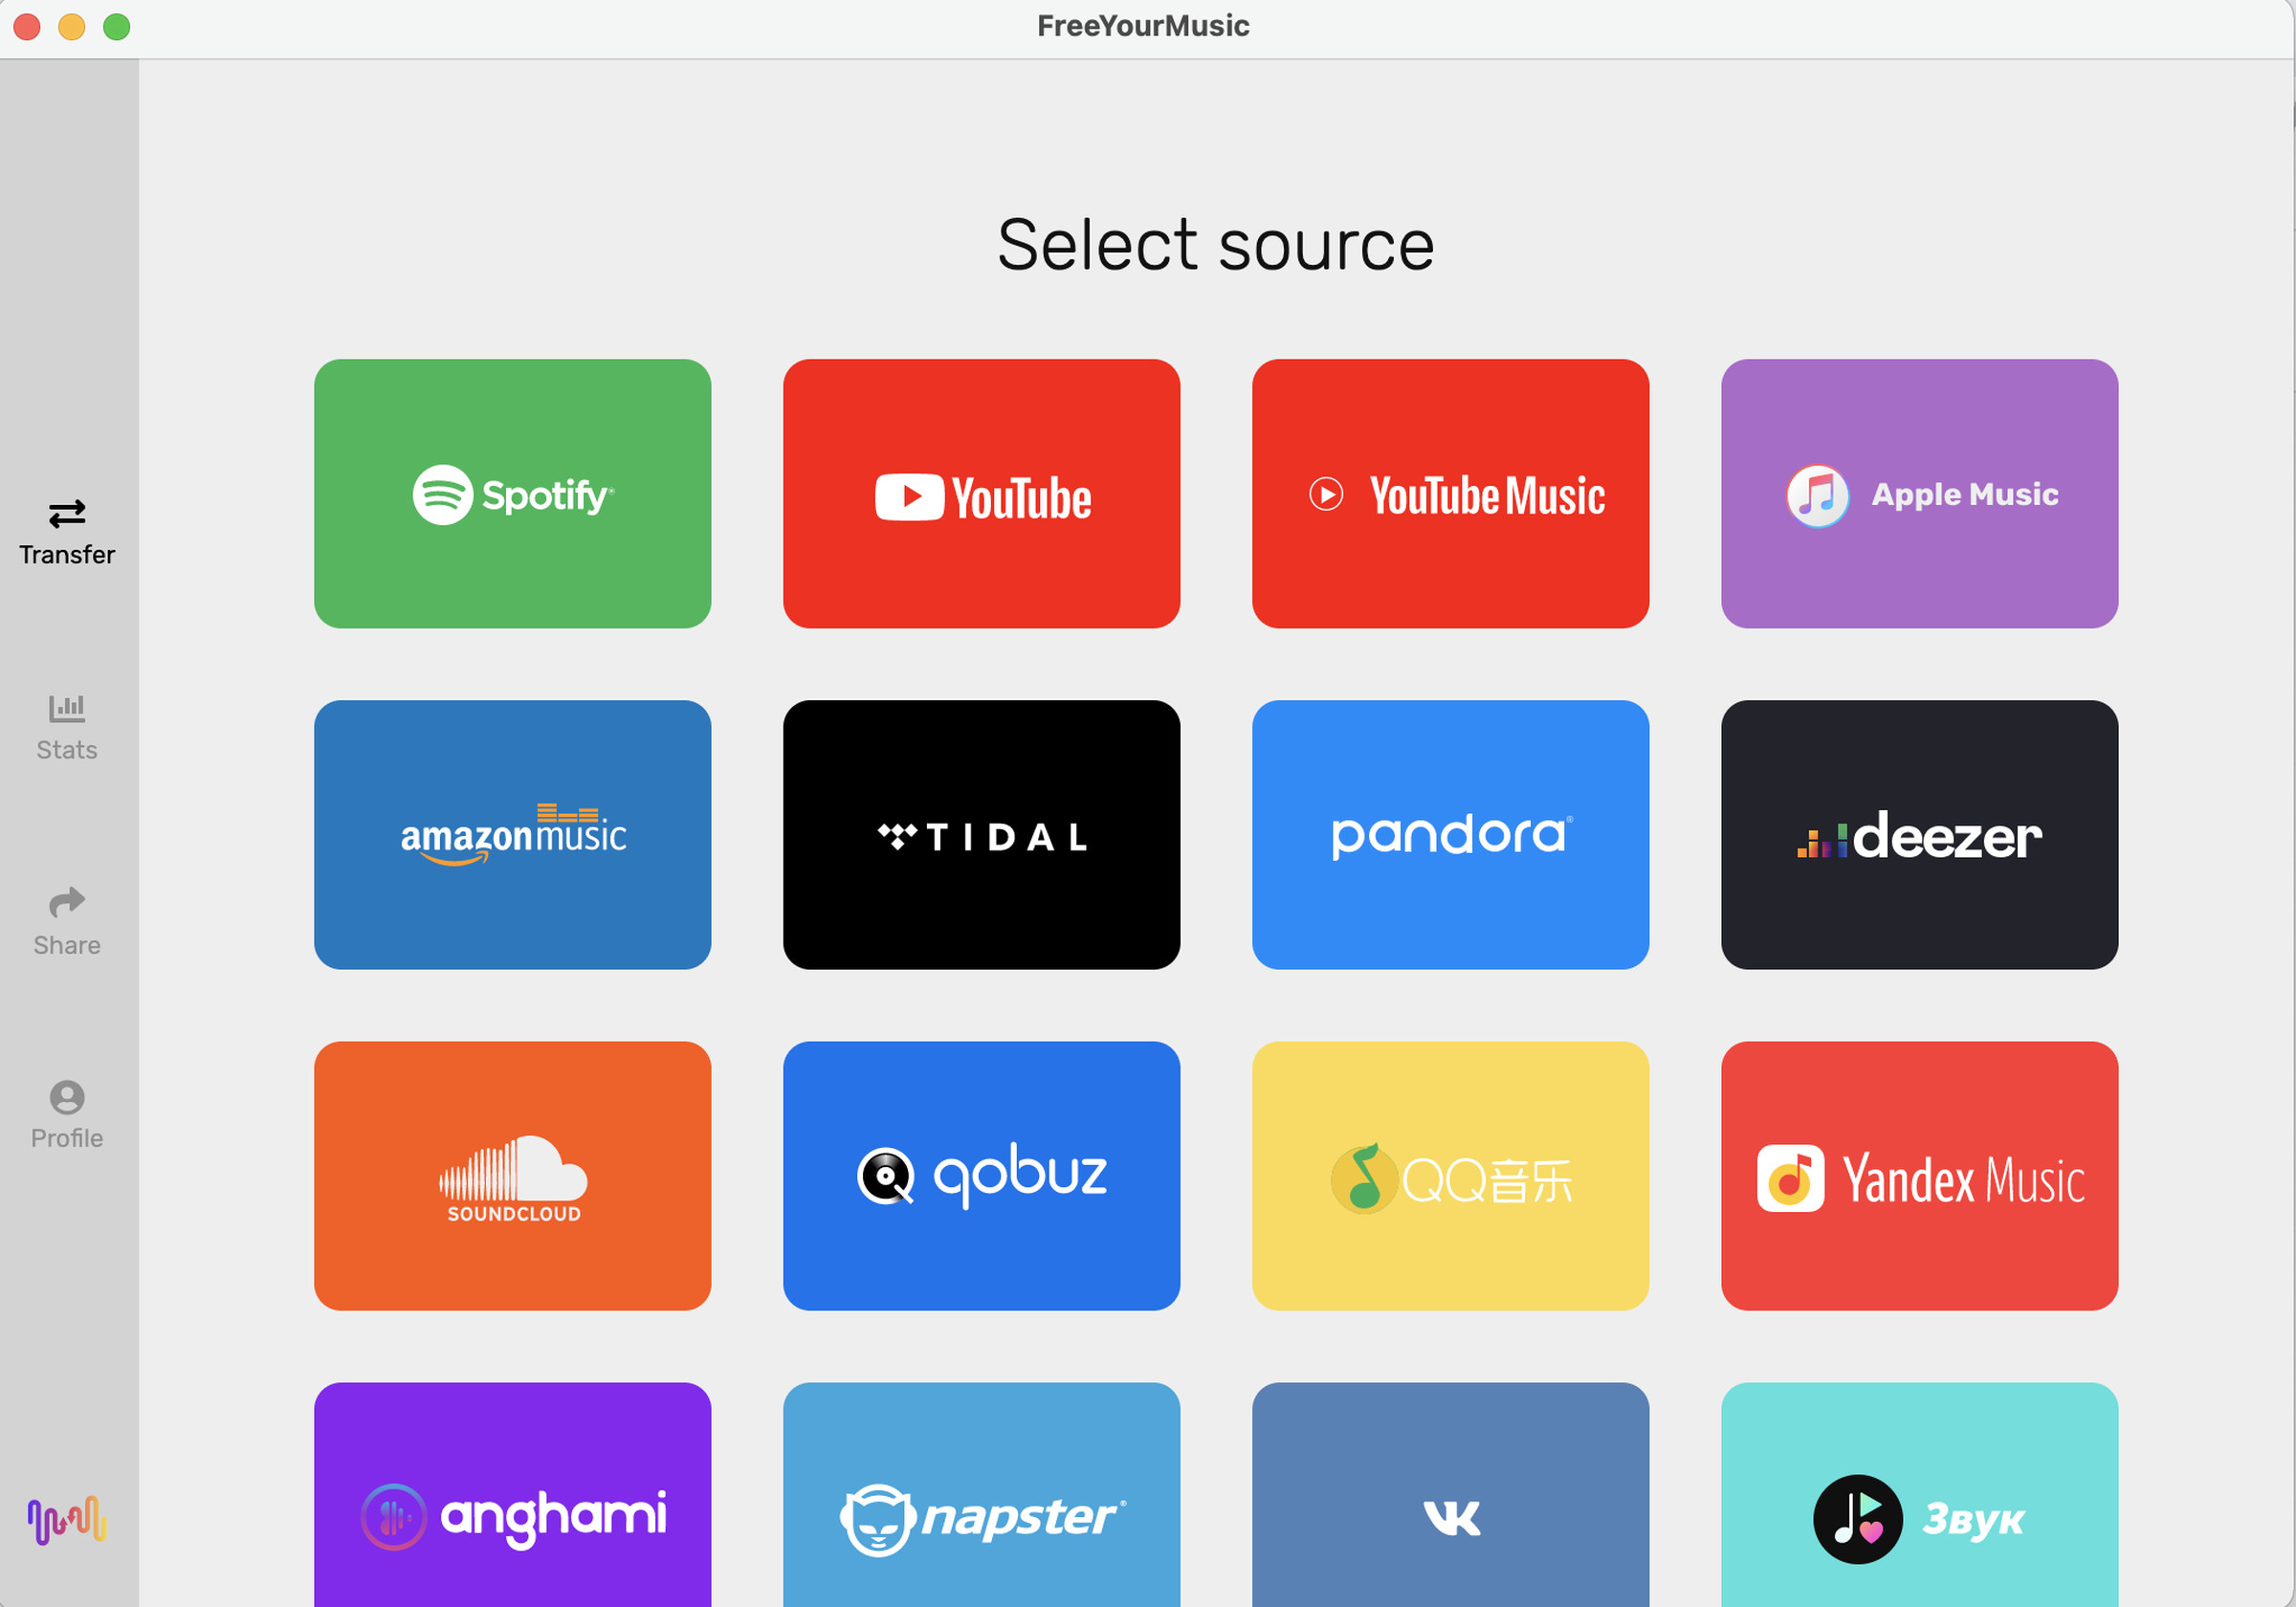 It’s very easy to choose your source music service.